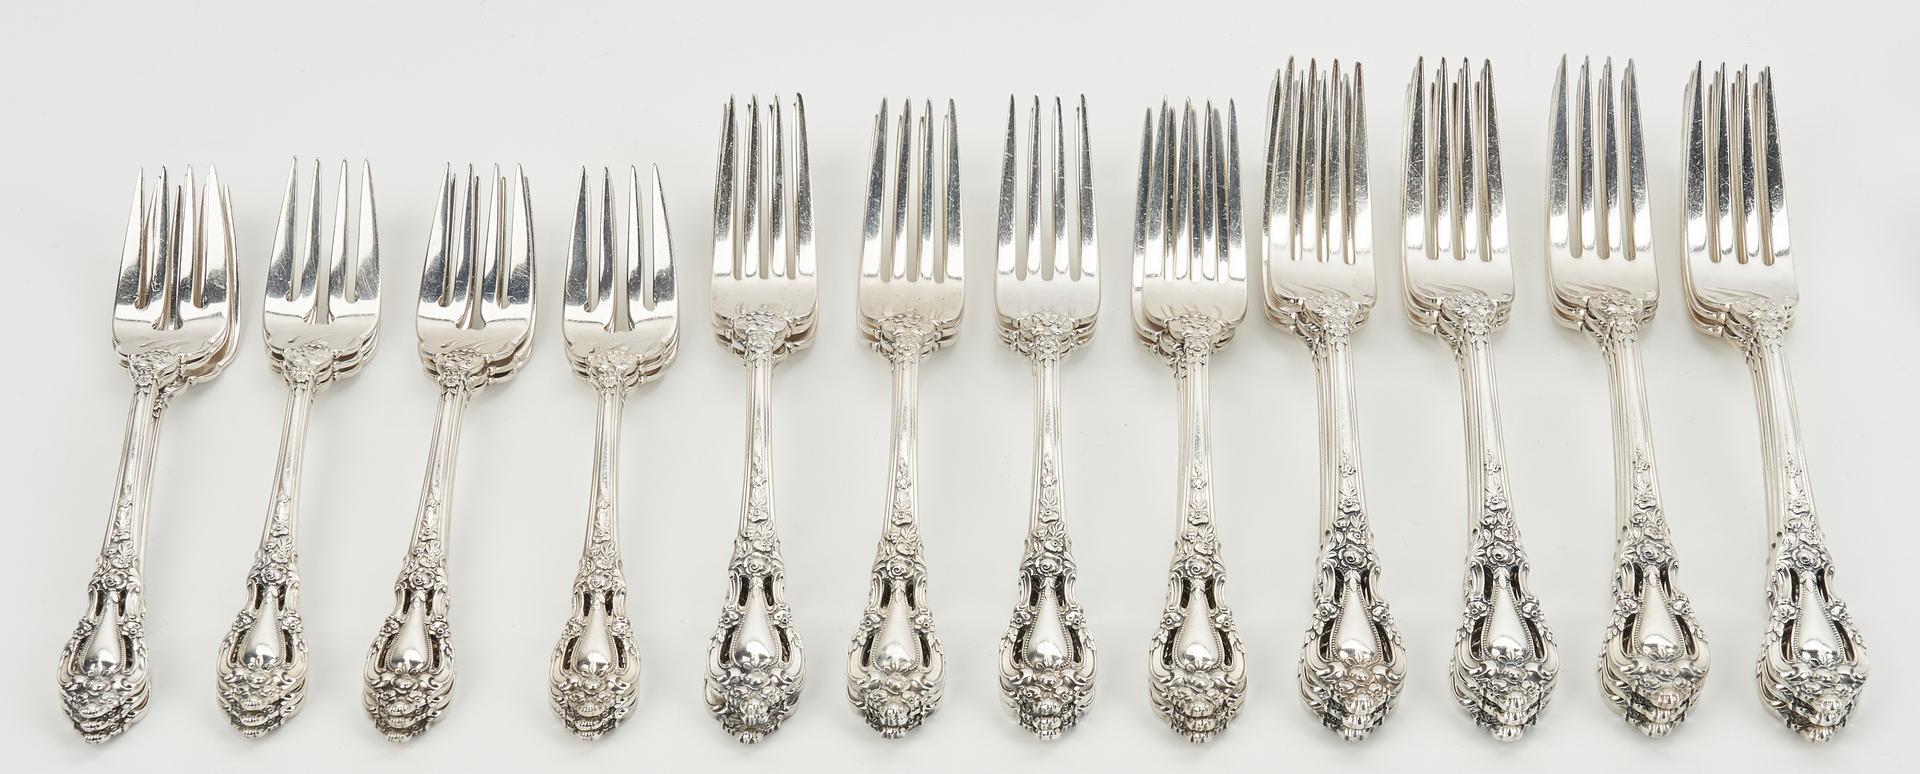 157 Pcs. Lunt Eloquence Pattern Sterling Silver Flatware - Image 3 of 17